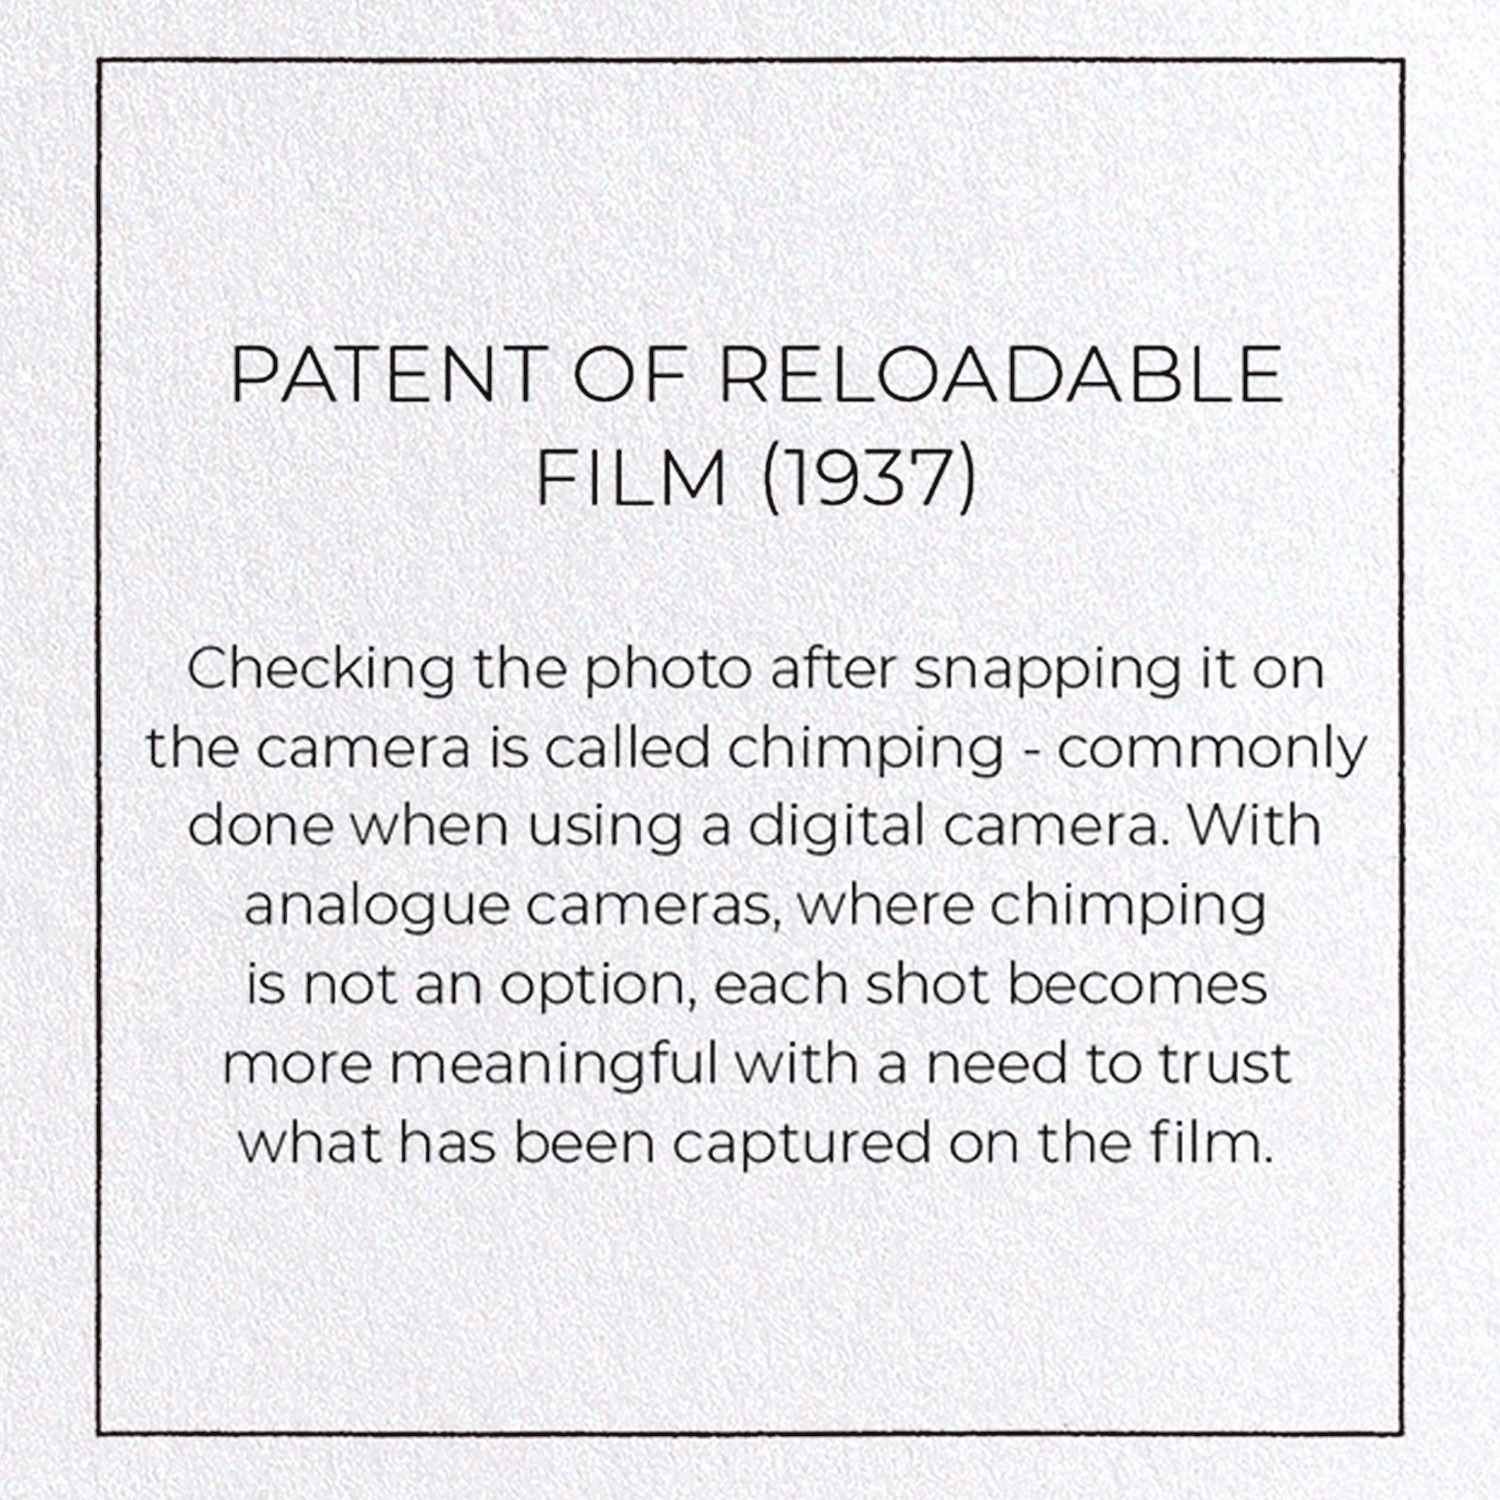 PATENT OF RELOADABLE FILM (1937)